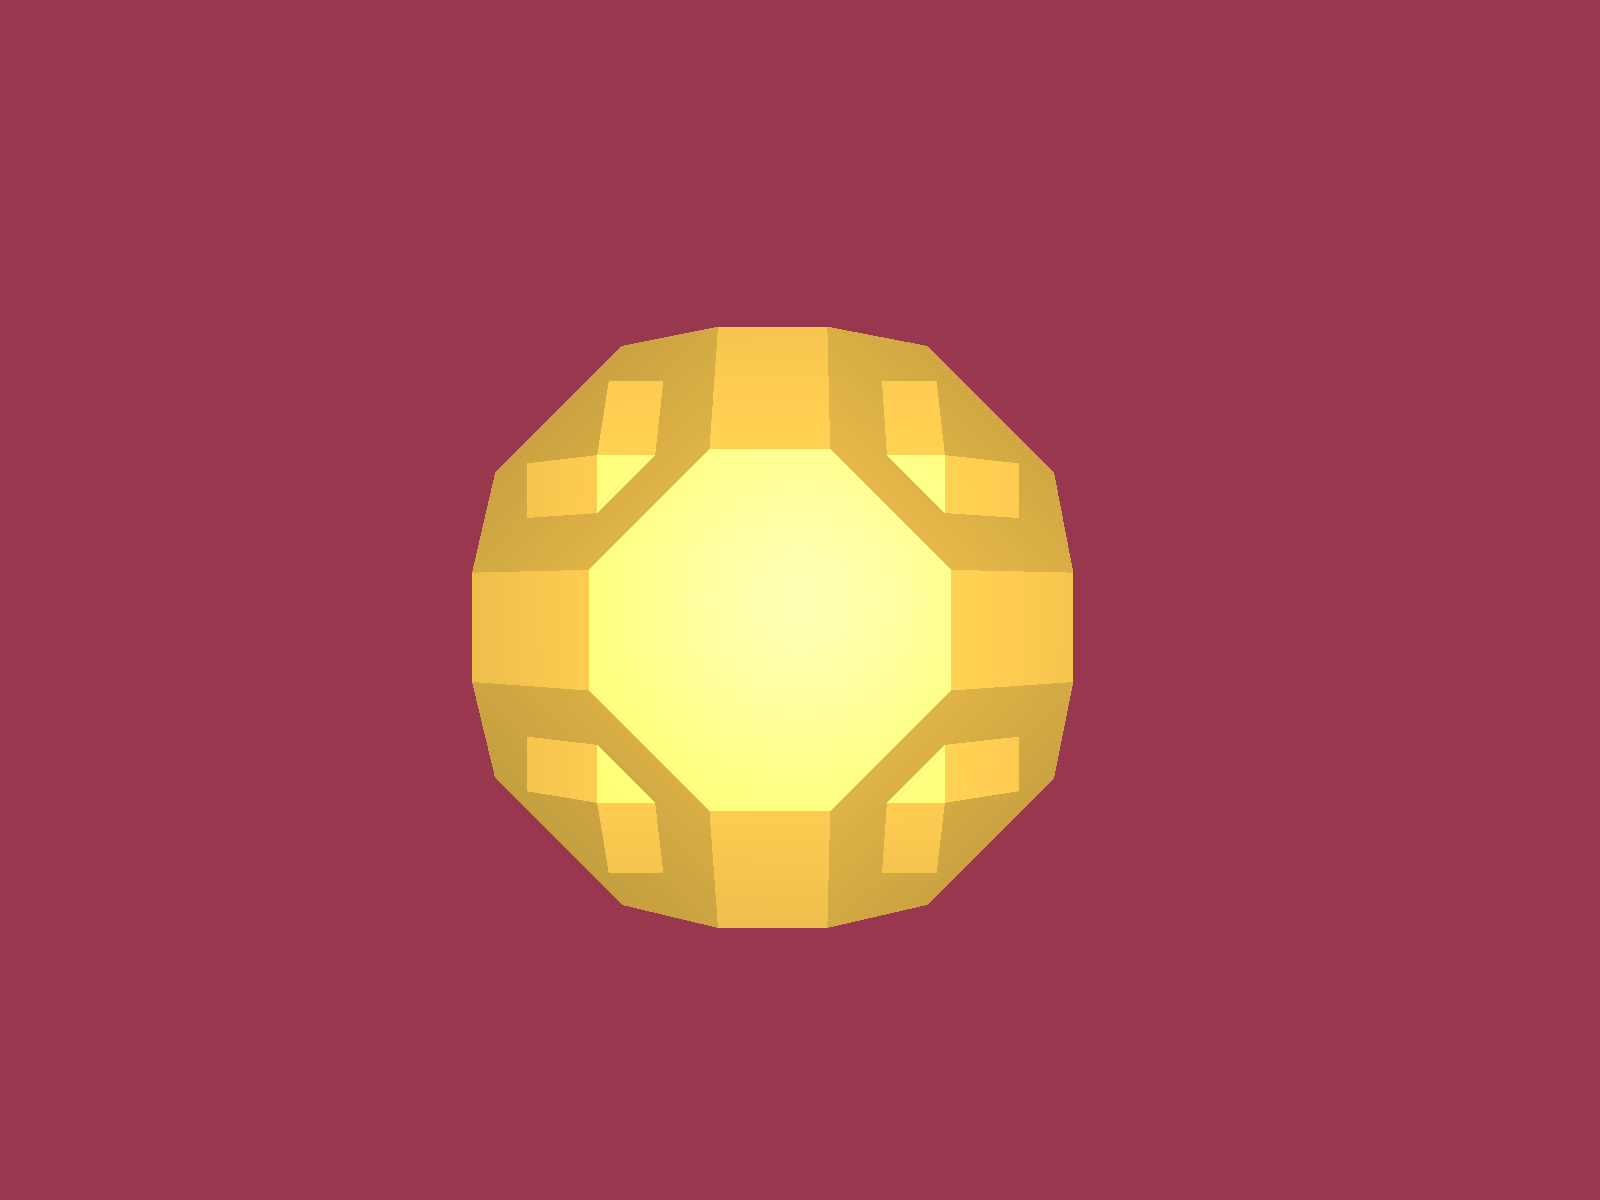 Rendering of a faceted sphere